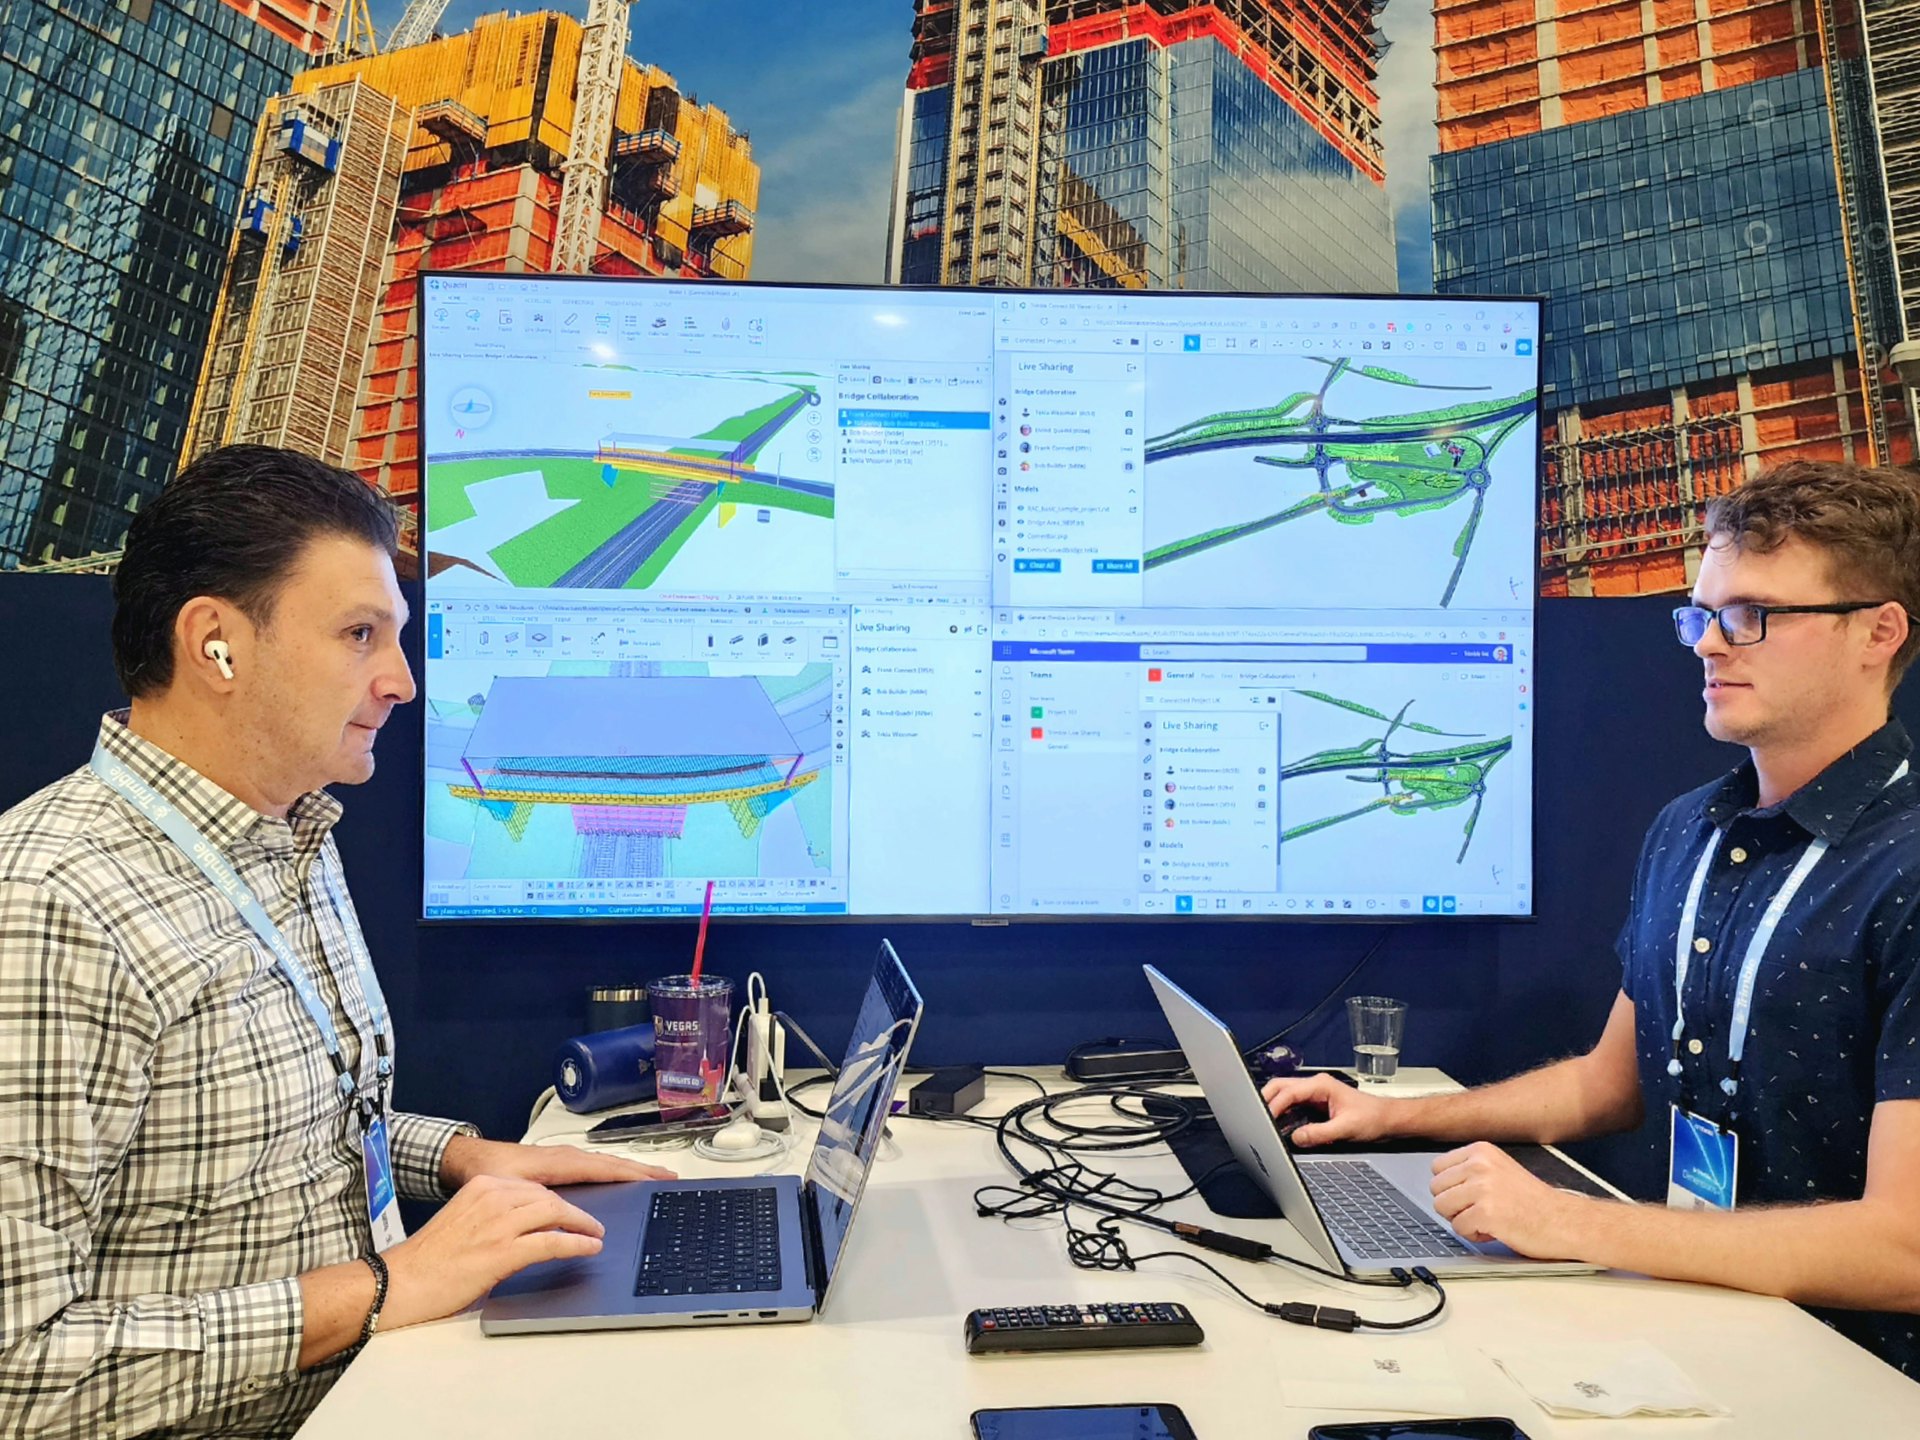 Real Time Model Collaboration is one of the initial capabilities delivered under the Trimble Construction Cloud initiative.